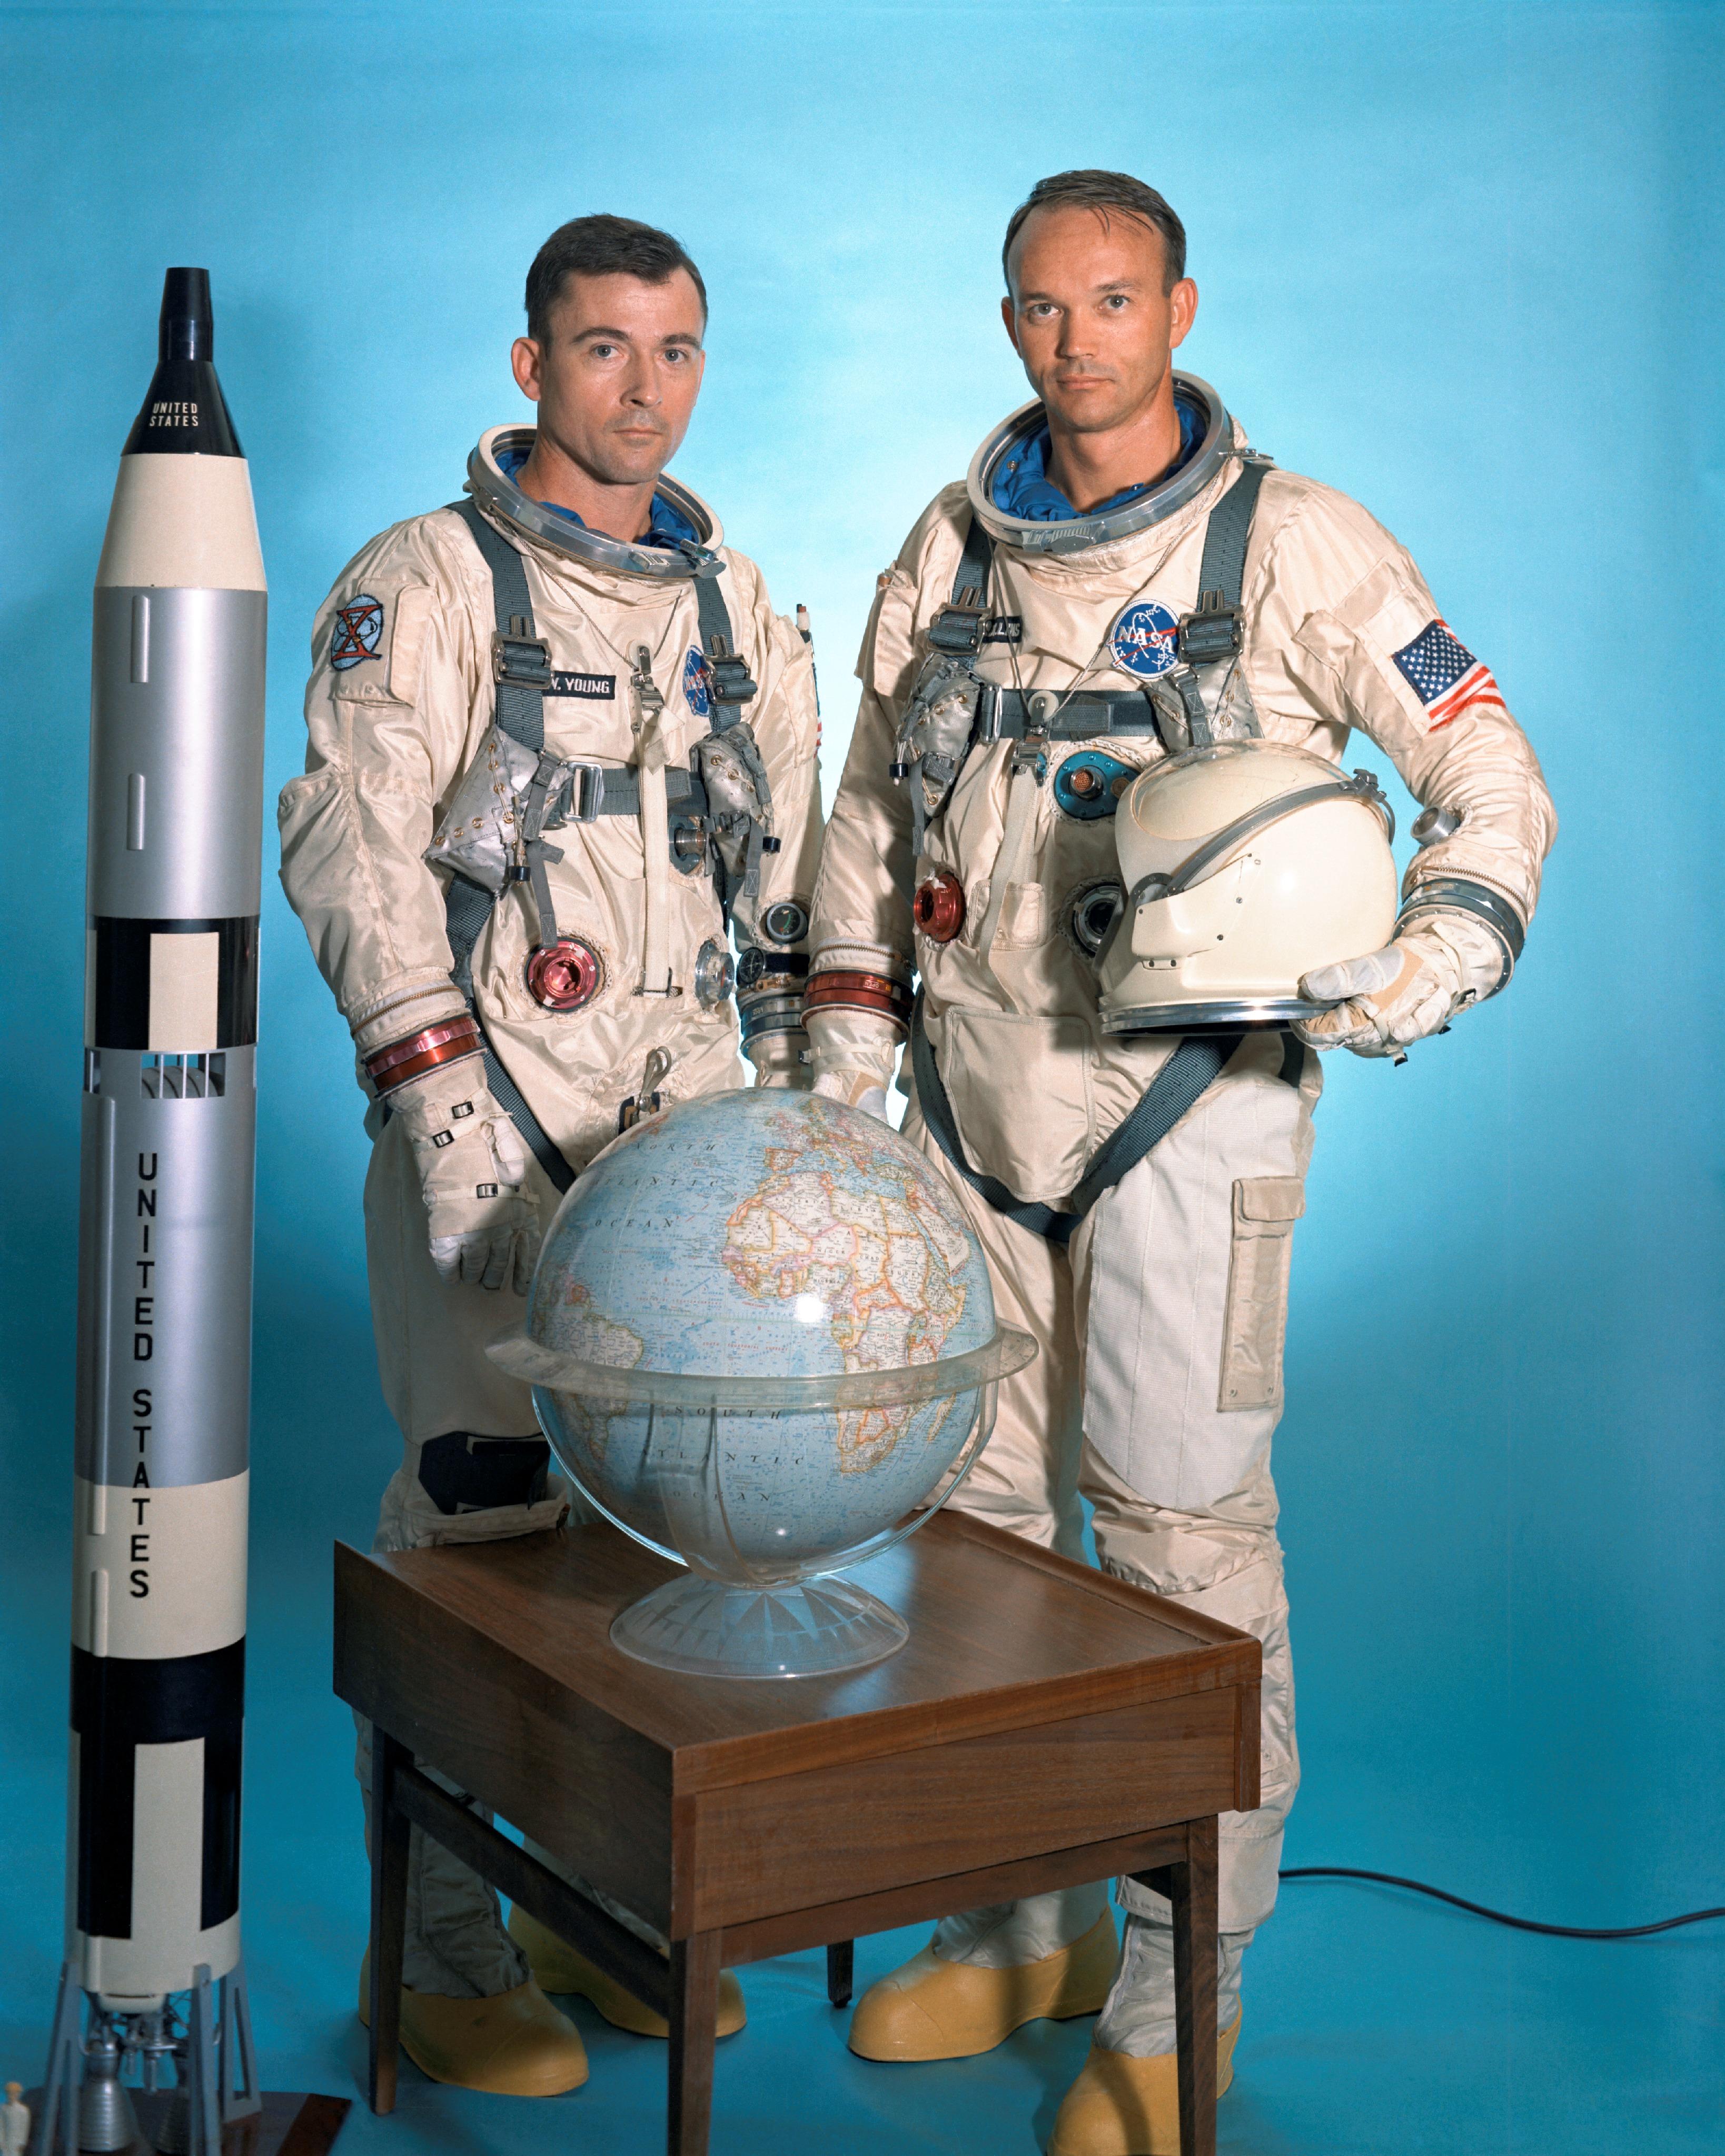 Gemini 10 prime crew (Young and Collins)